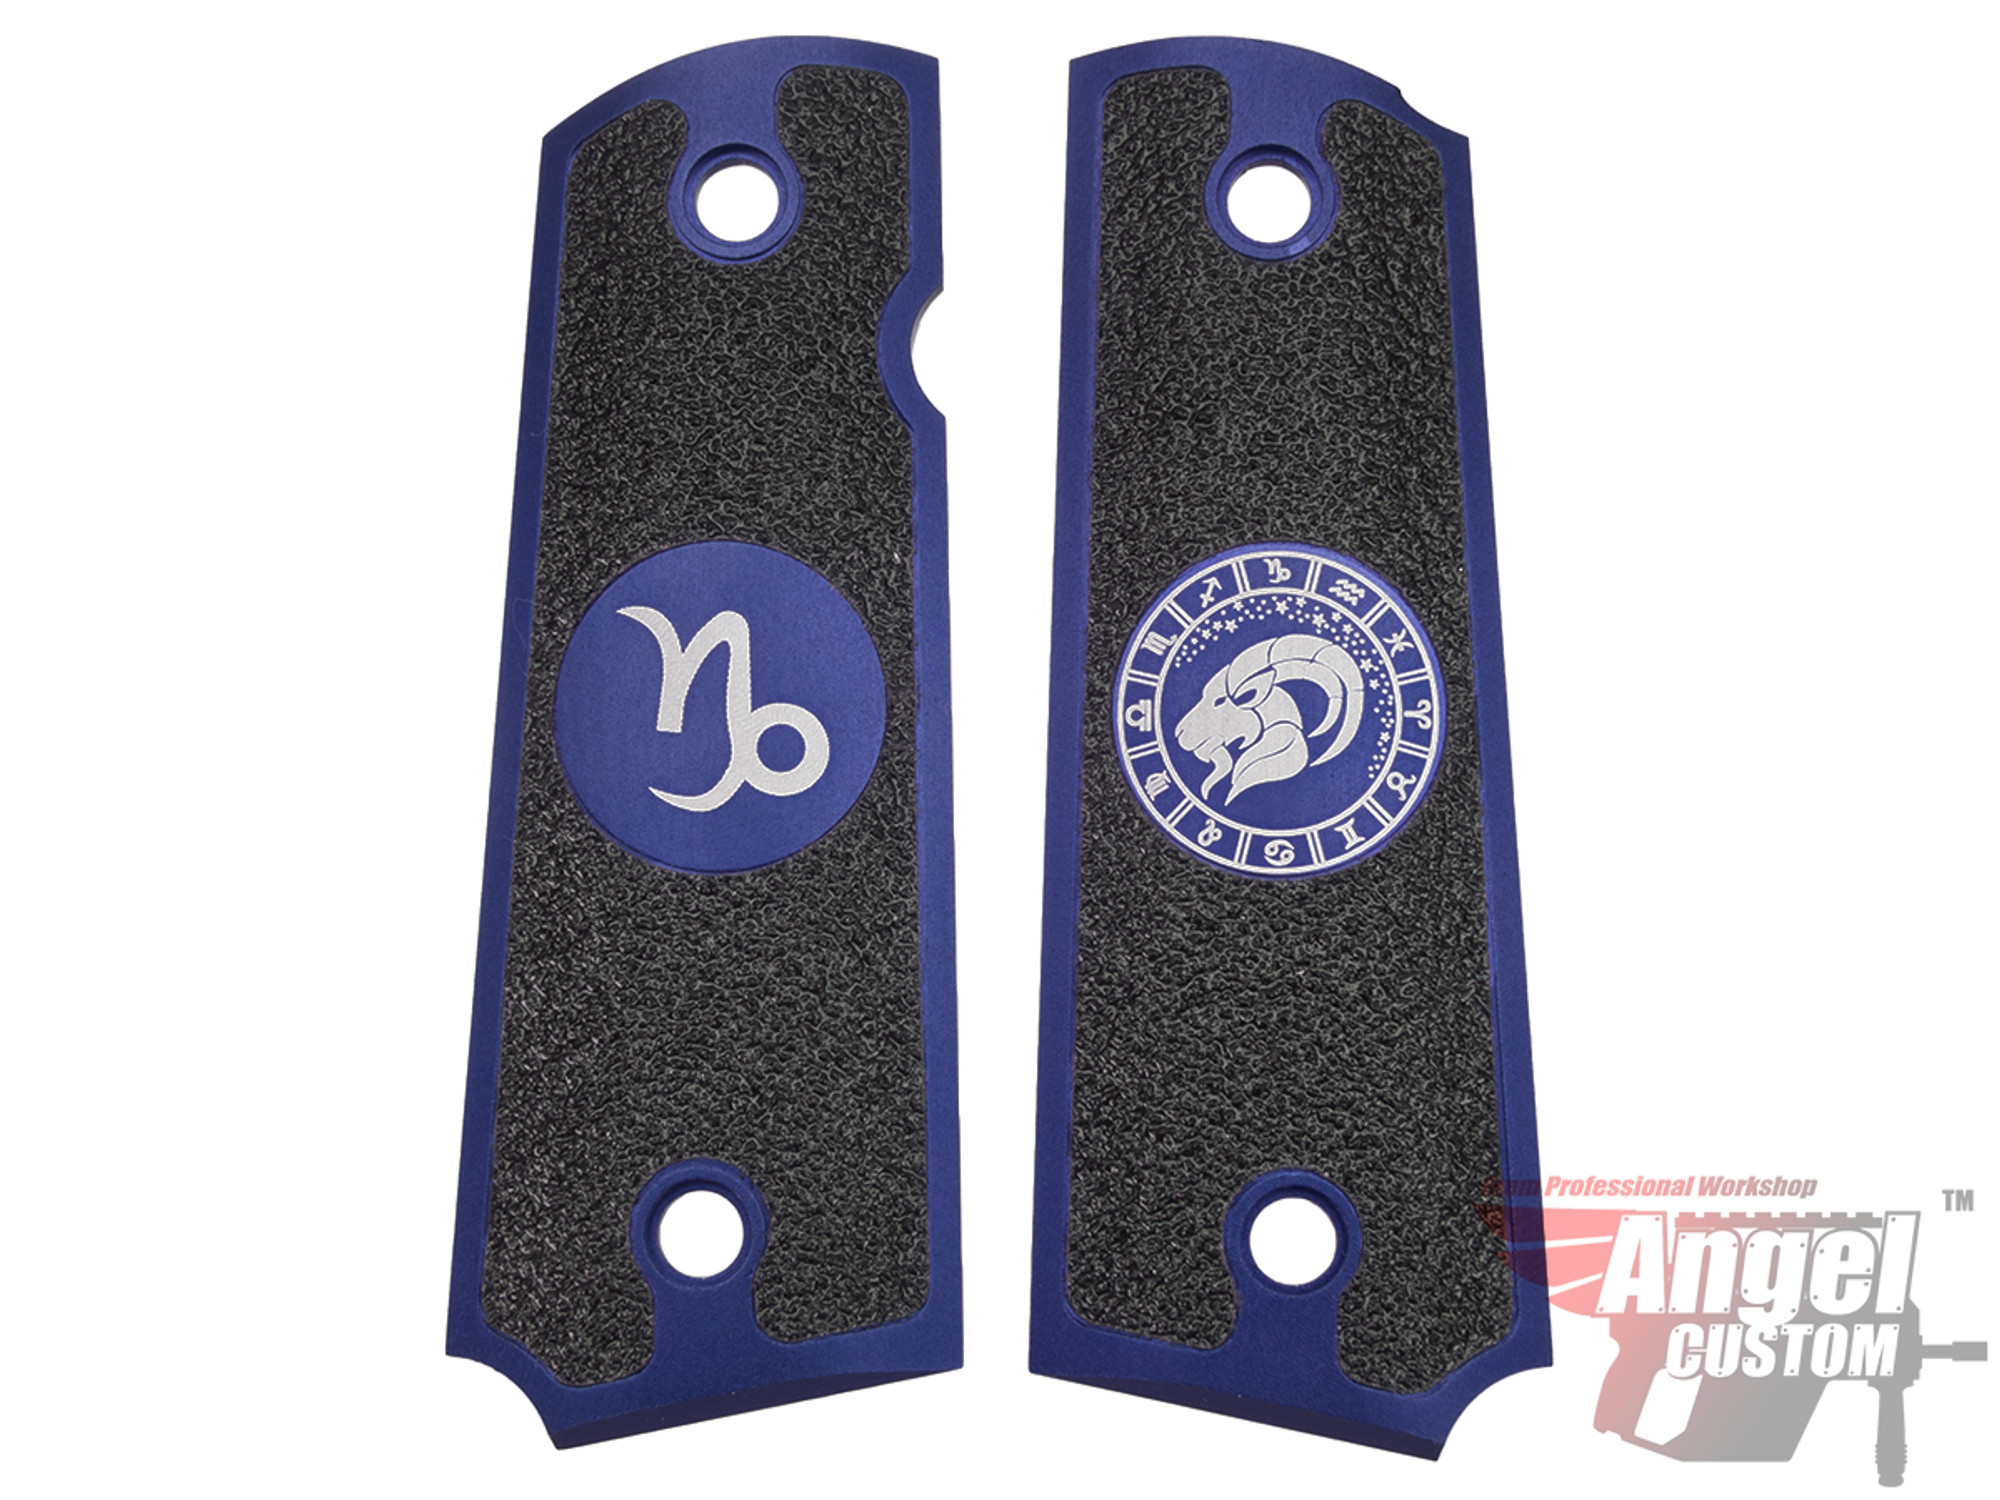 Angel Custom CNC Machined Tac-Glove "Zodiac" Grips for Tokyo Marui/KWA/Western Arms 1911 Series Airsoft Pistols - Navy Blue (Sign: Capricorn)